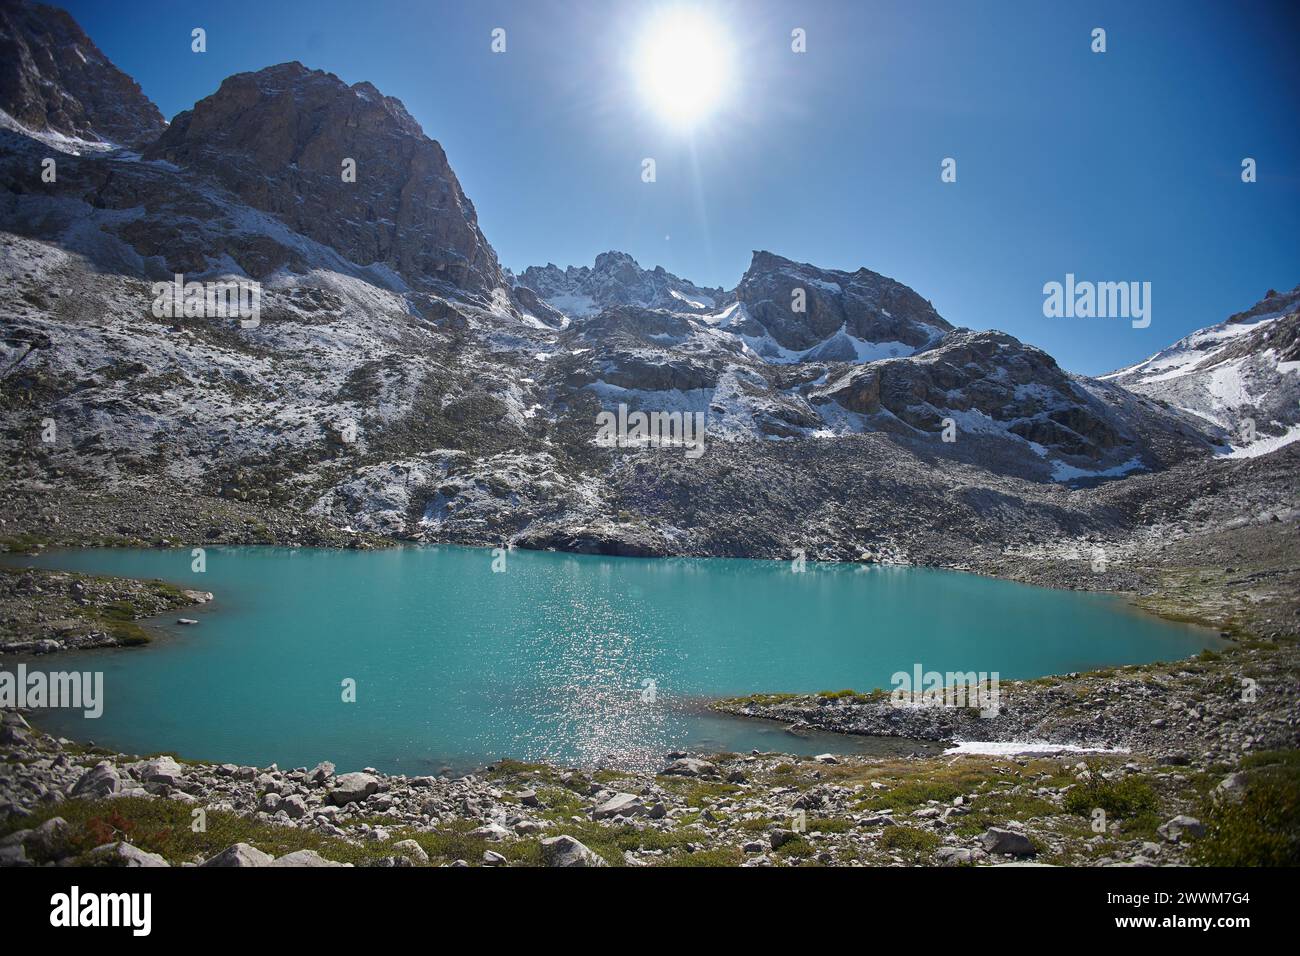 Pristine Mountain Lake With Snow Capped Peaks Under a Clear Blue Sky at Noon Stock Photo